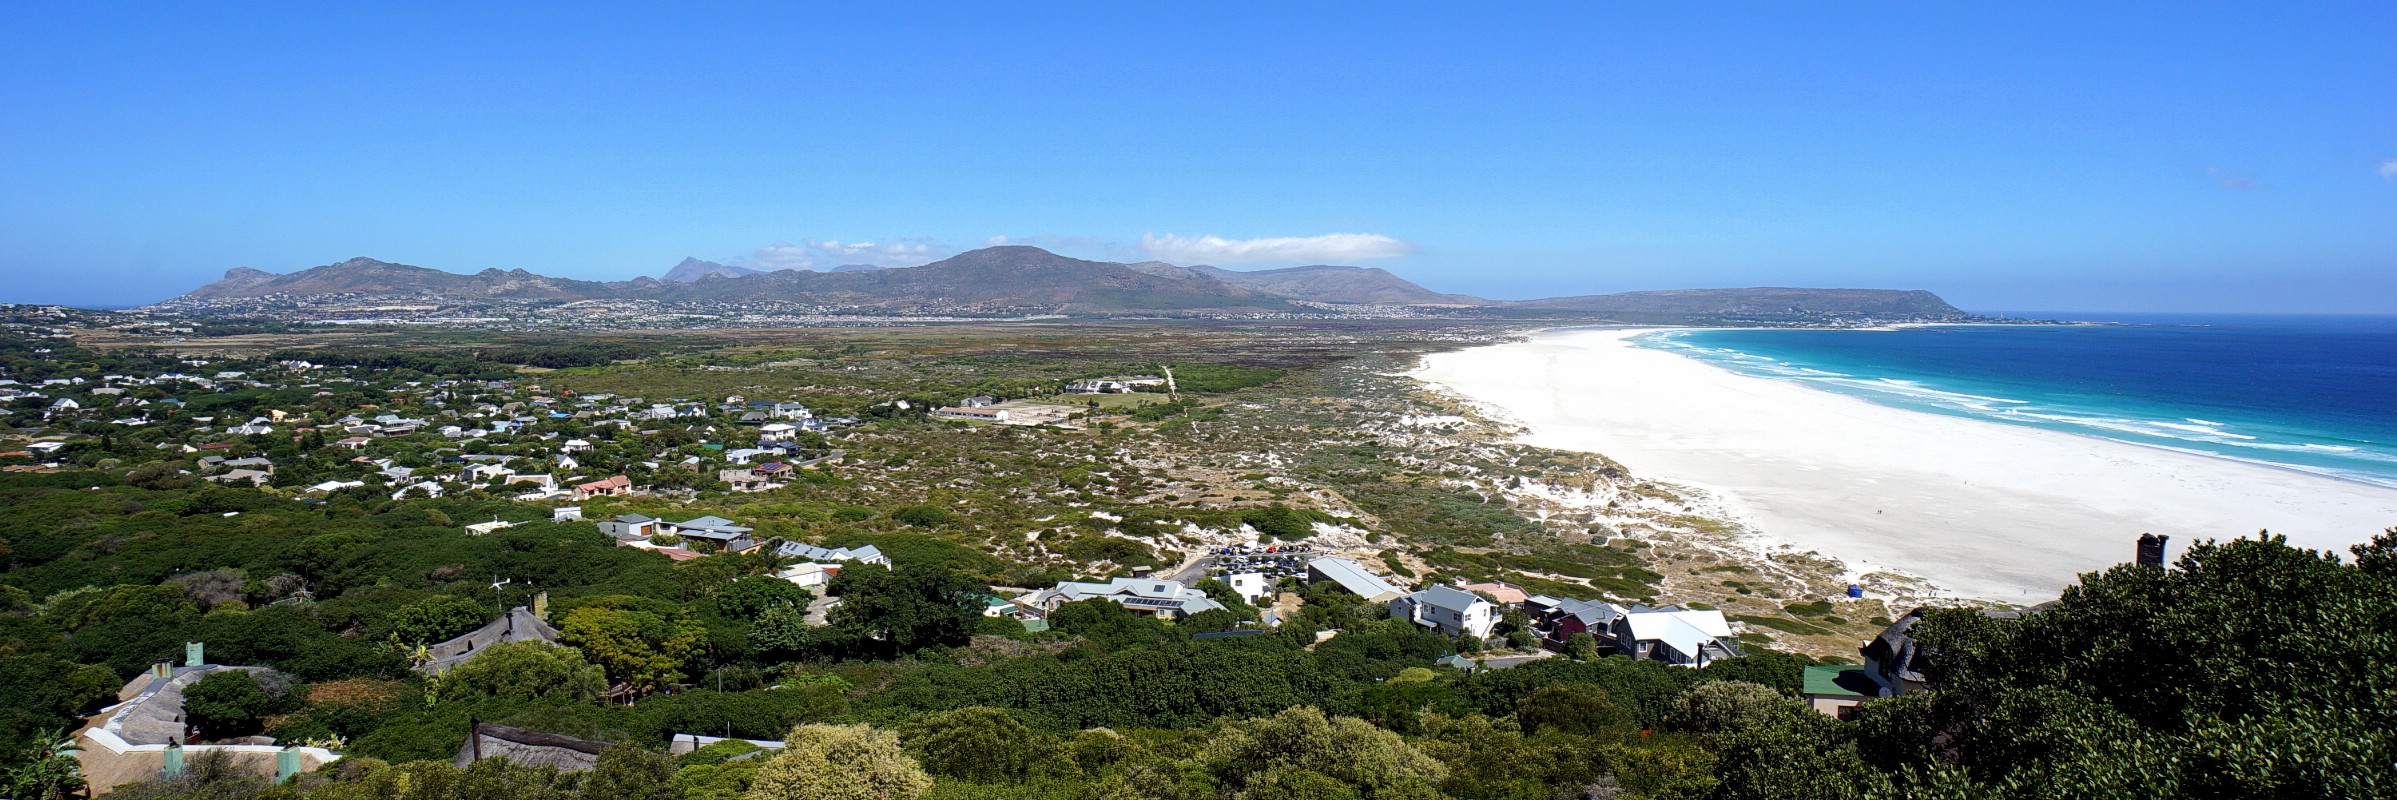 A panorama over Noordhoek Beach & Chapman's Peak as seen from the end of Chapman's Peak Drive, Cape Peninsula, Western Cape, South Africa. February 17, 2017.